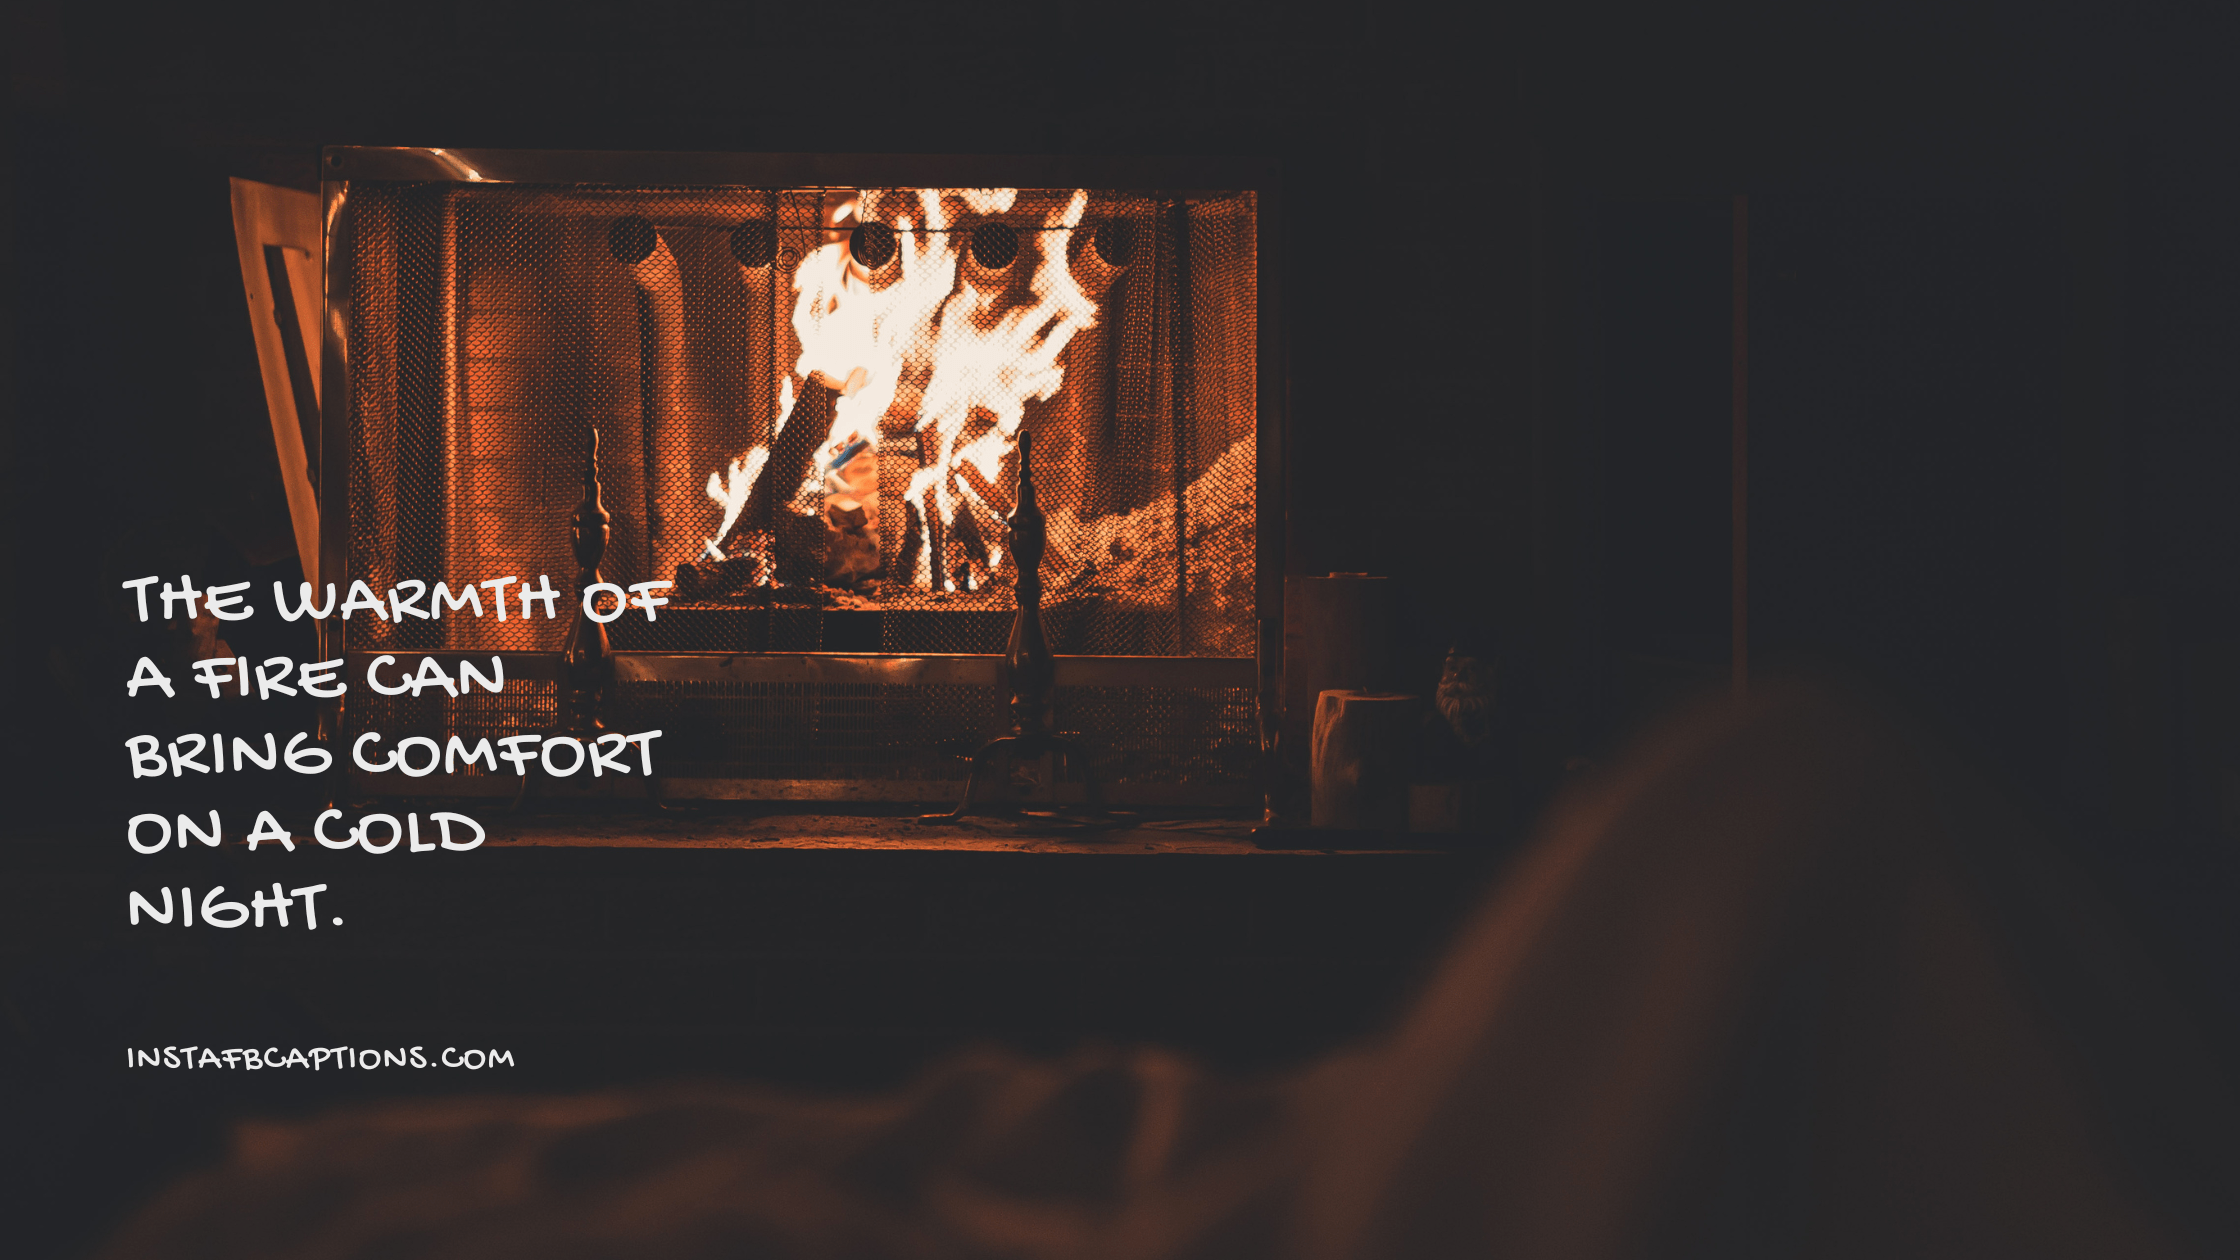 The warmth of a fire can bring comfort on a cold night. fire instagram captions - 2022 Fire Instagram Captions - [NEW] Fire Captions Quotes For Instagram in 2023